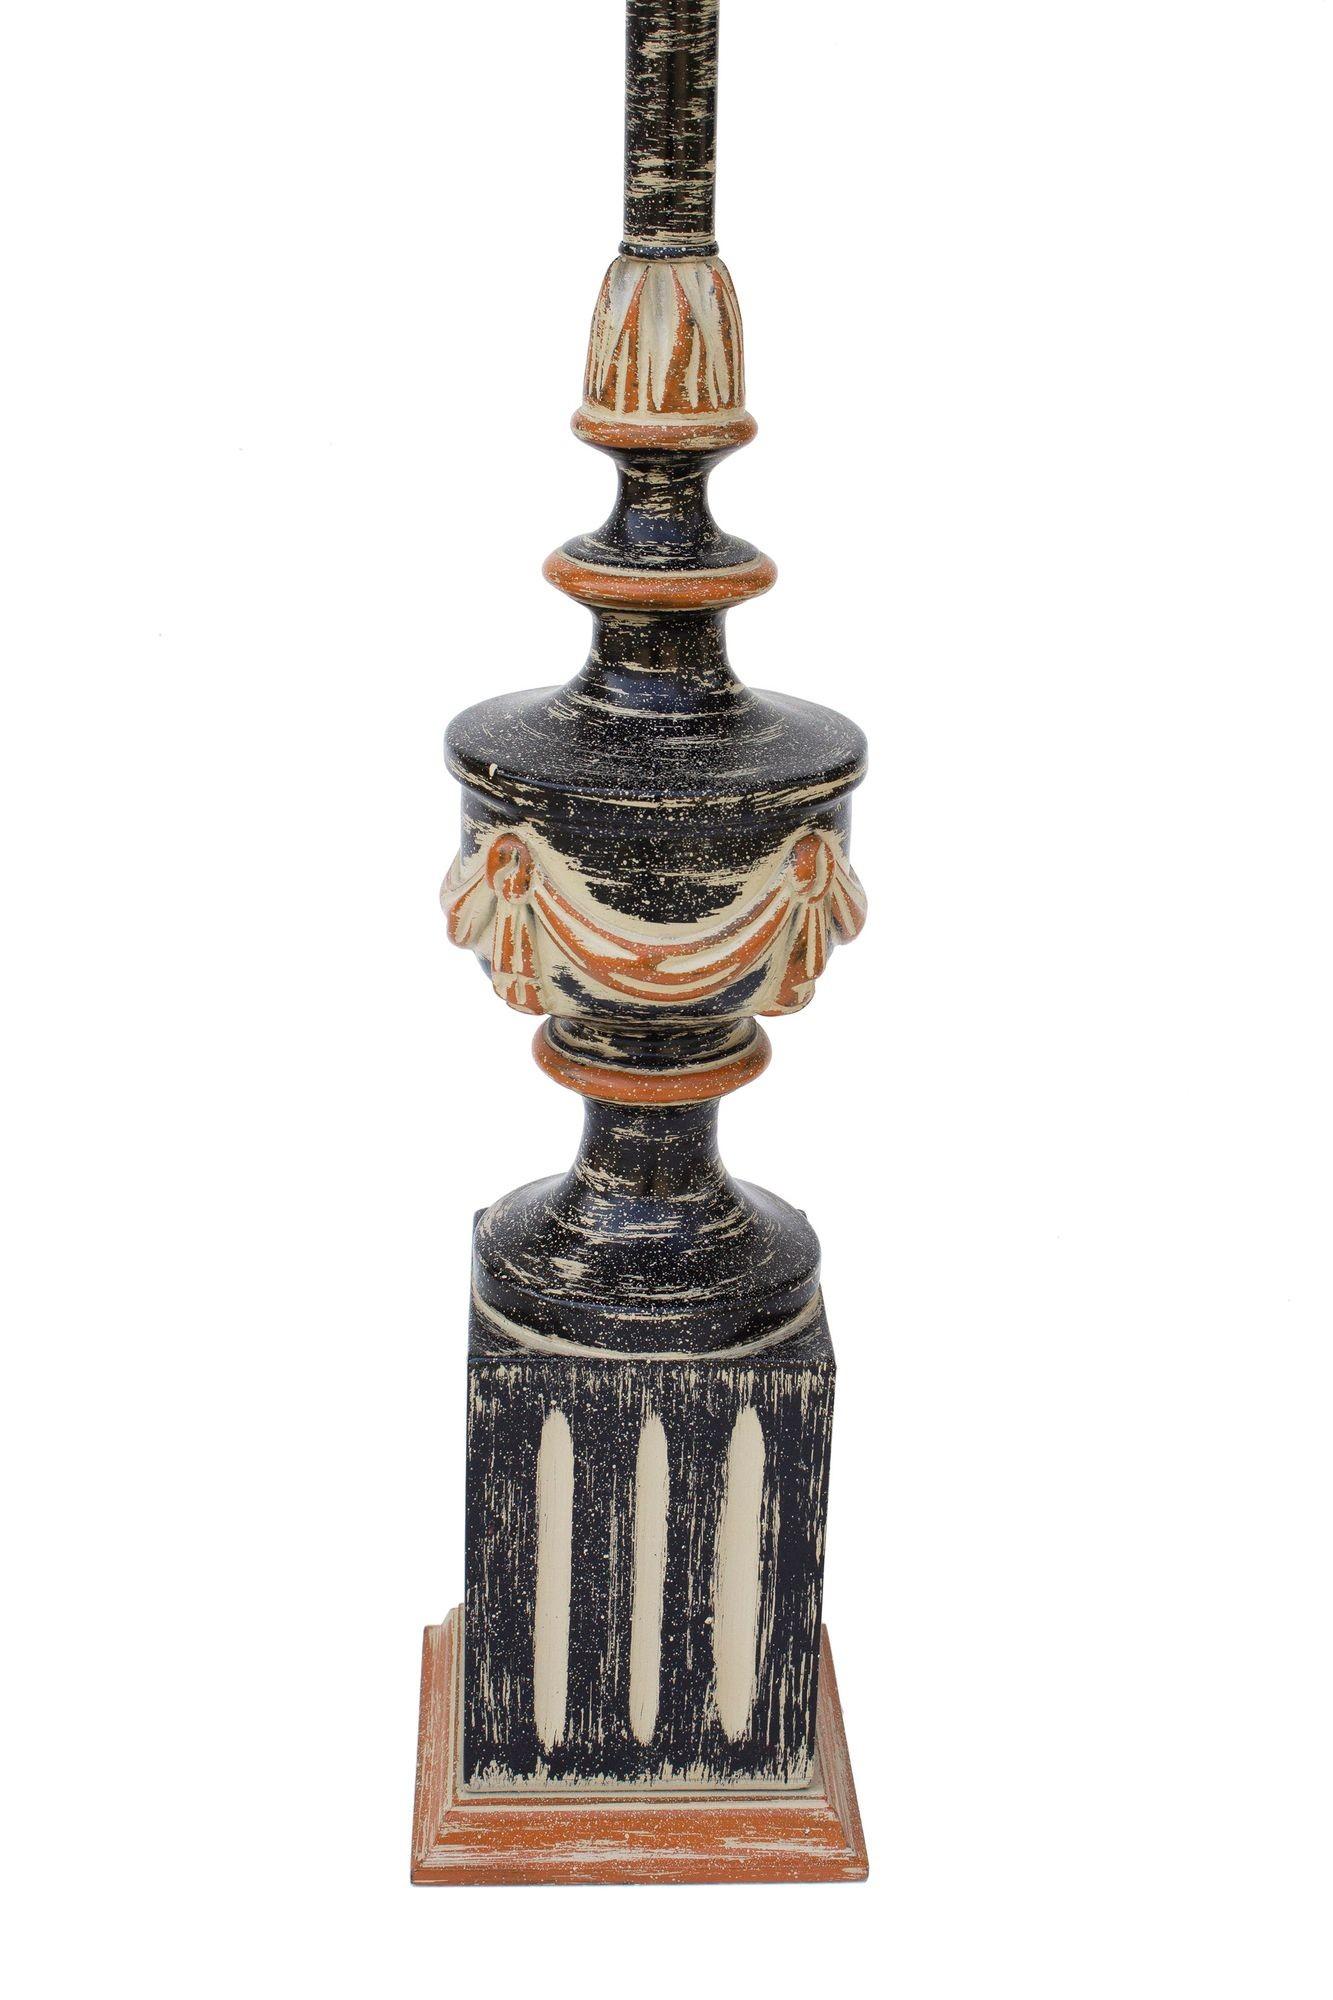 American Hand Finished Neoclassical Table Lamp in Black, Taupe, and Burnt Orange For Sale